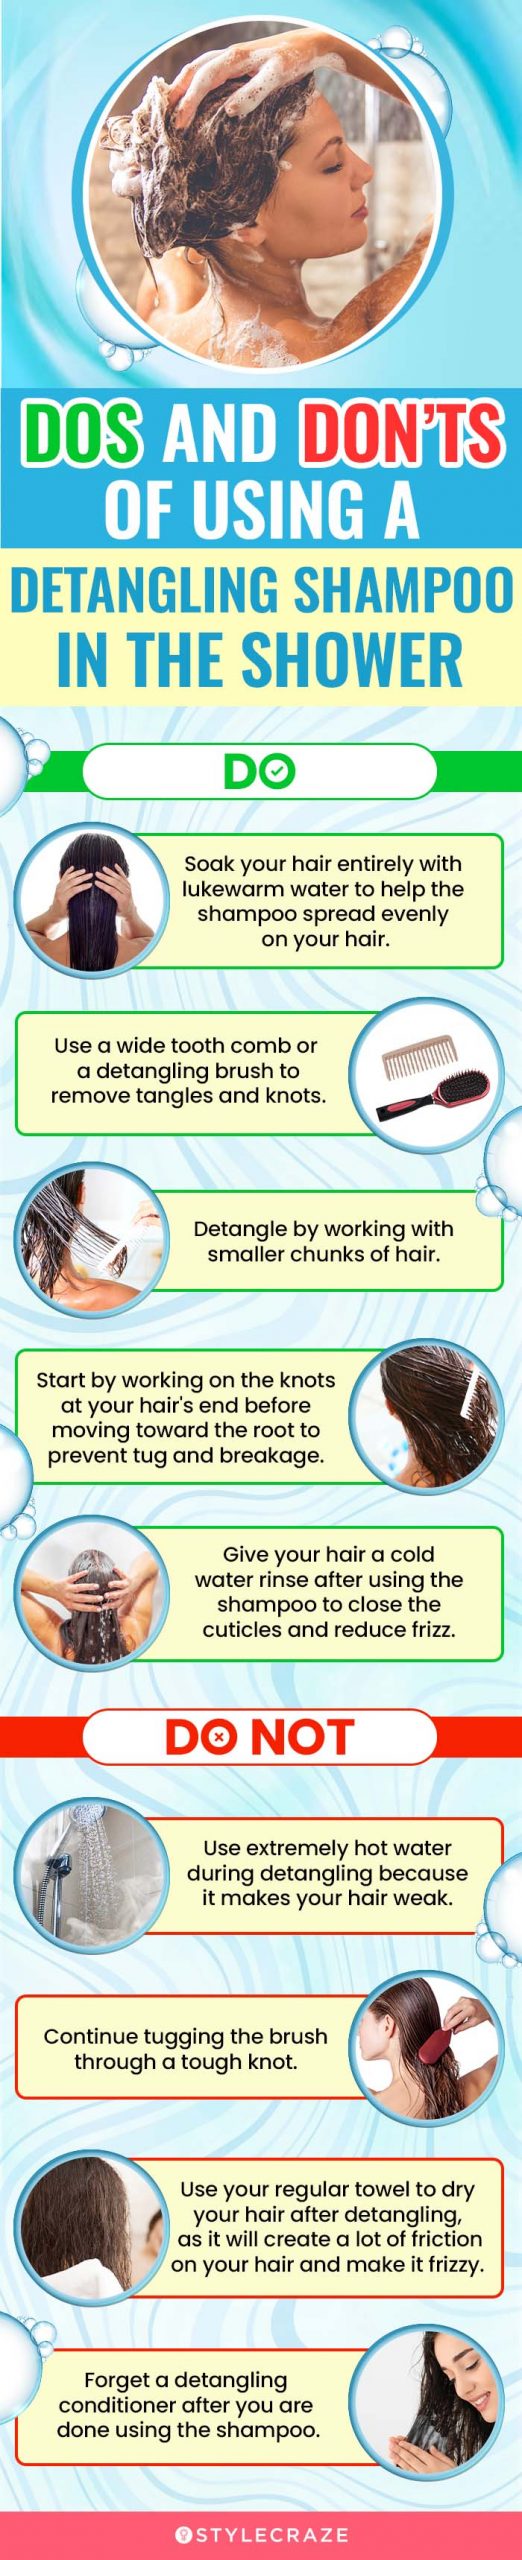 DOs And DON'Ts Of Using A Detangling Shampoo In The Shower (infographic)